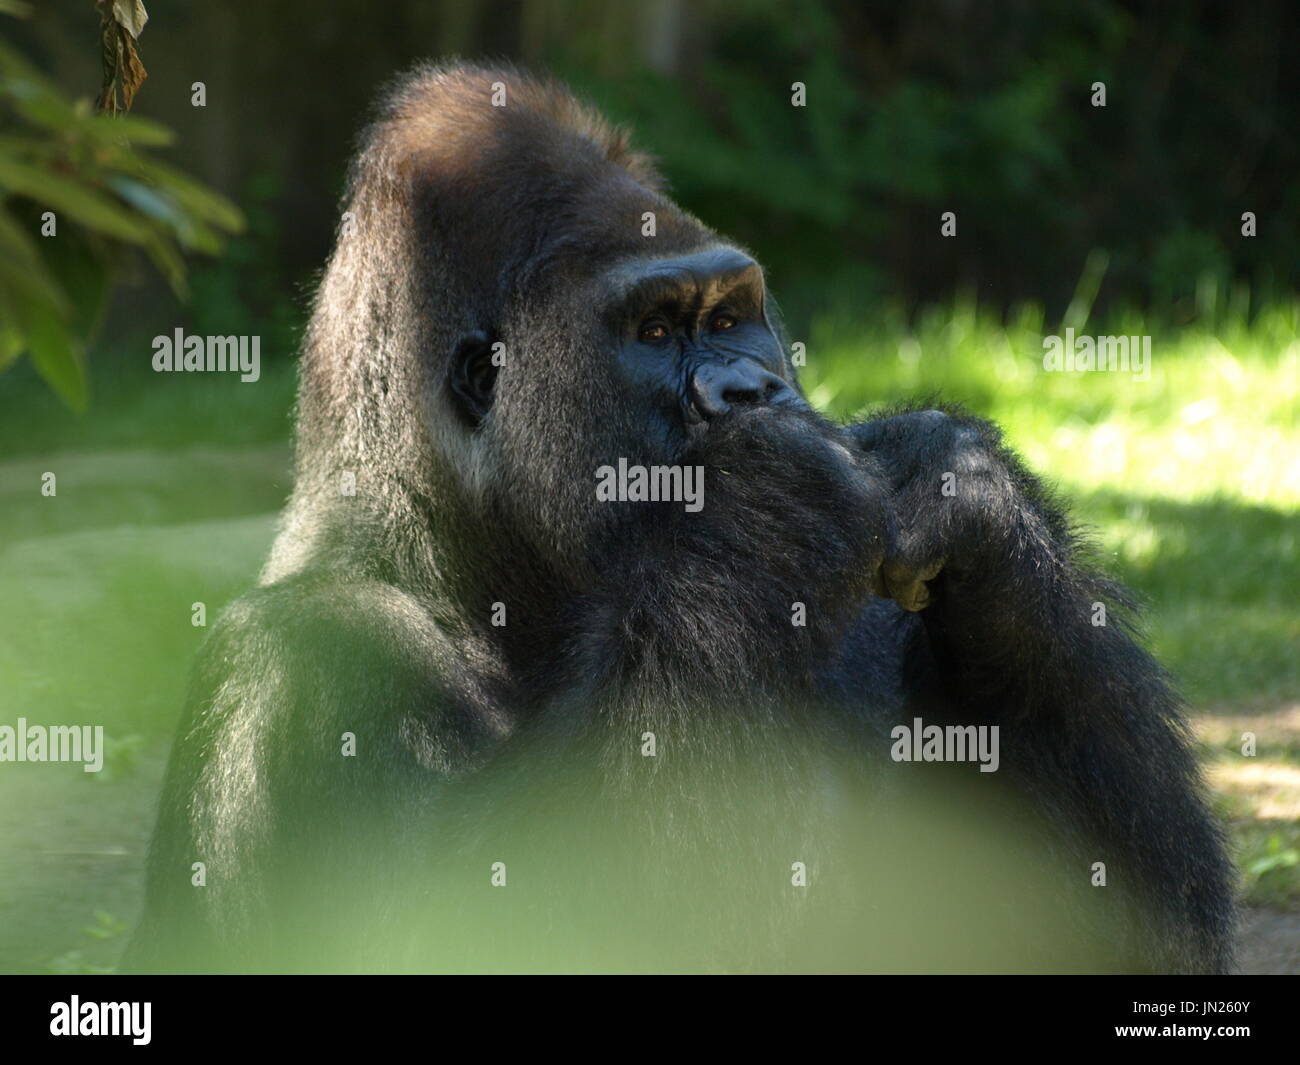 Great ape gorilla looking into distance pensively while nibbling on food Stock Photo